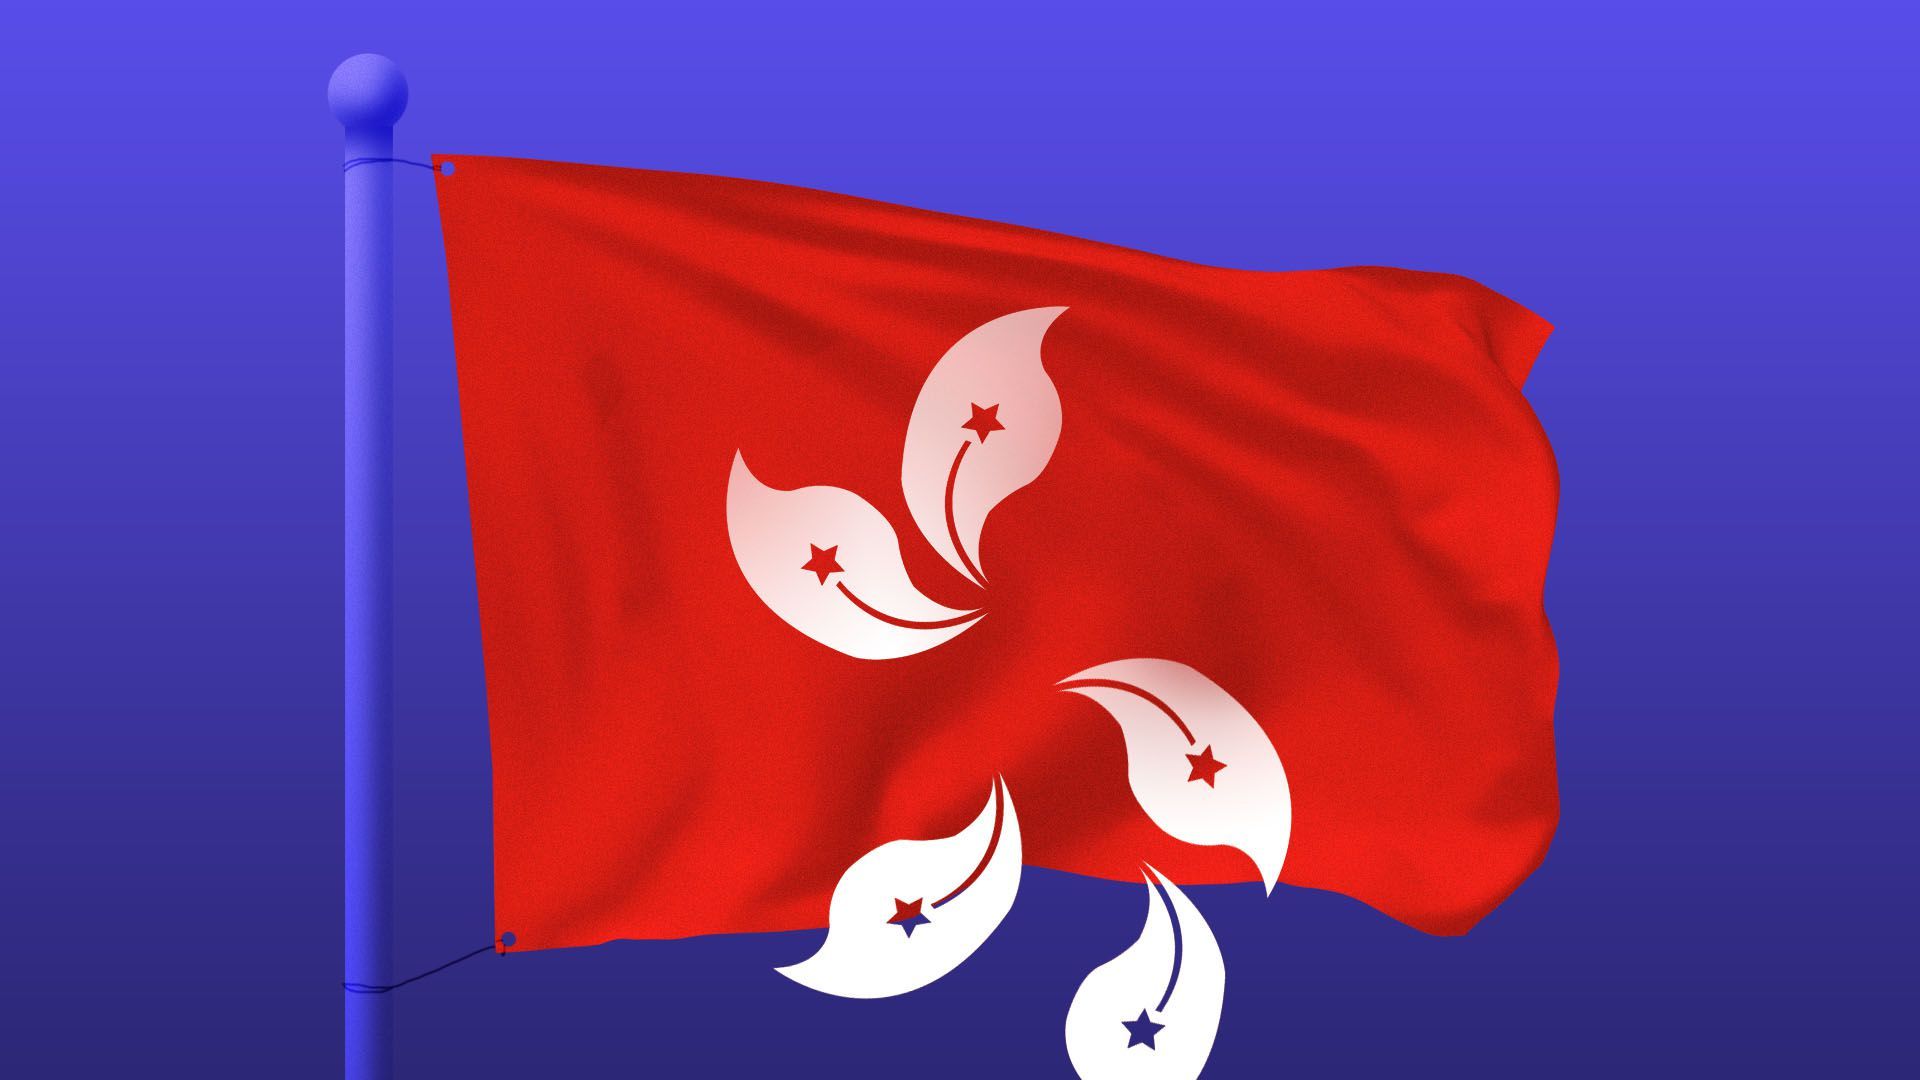 Illustration of a the Hong Kong flag with the flower petals falling away